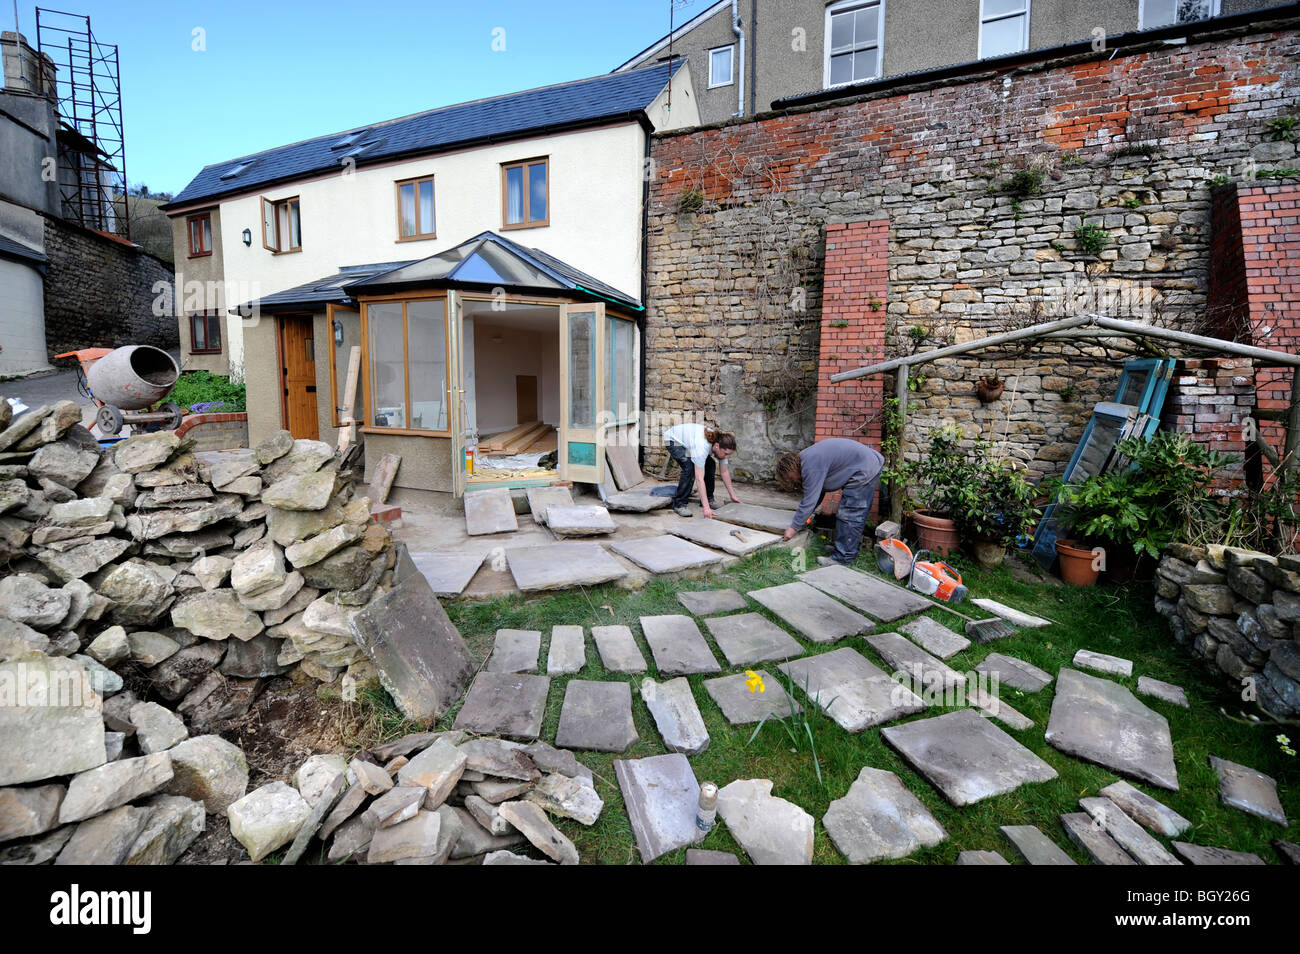 Builders lay out natural stone slabs in planning a patio, Gloucestershire UK Stock Photo